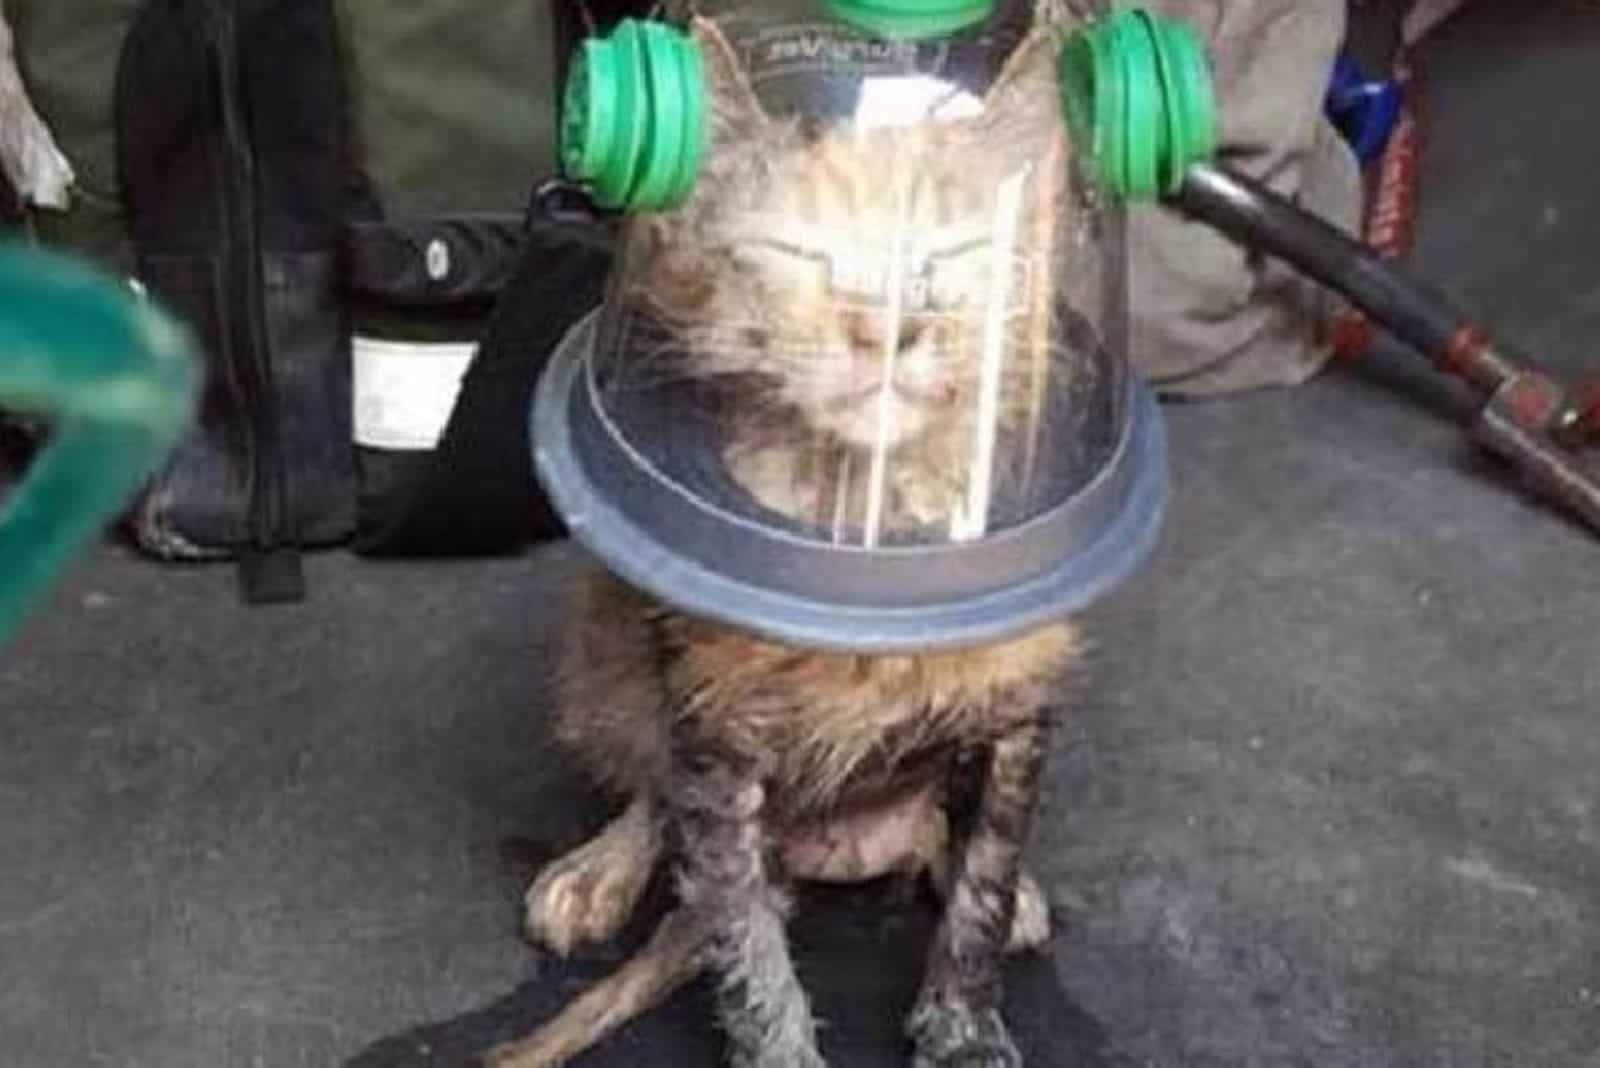 a shaggy cat with an oxygen cap on its head